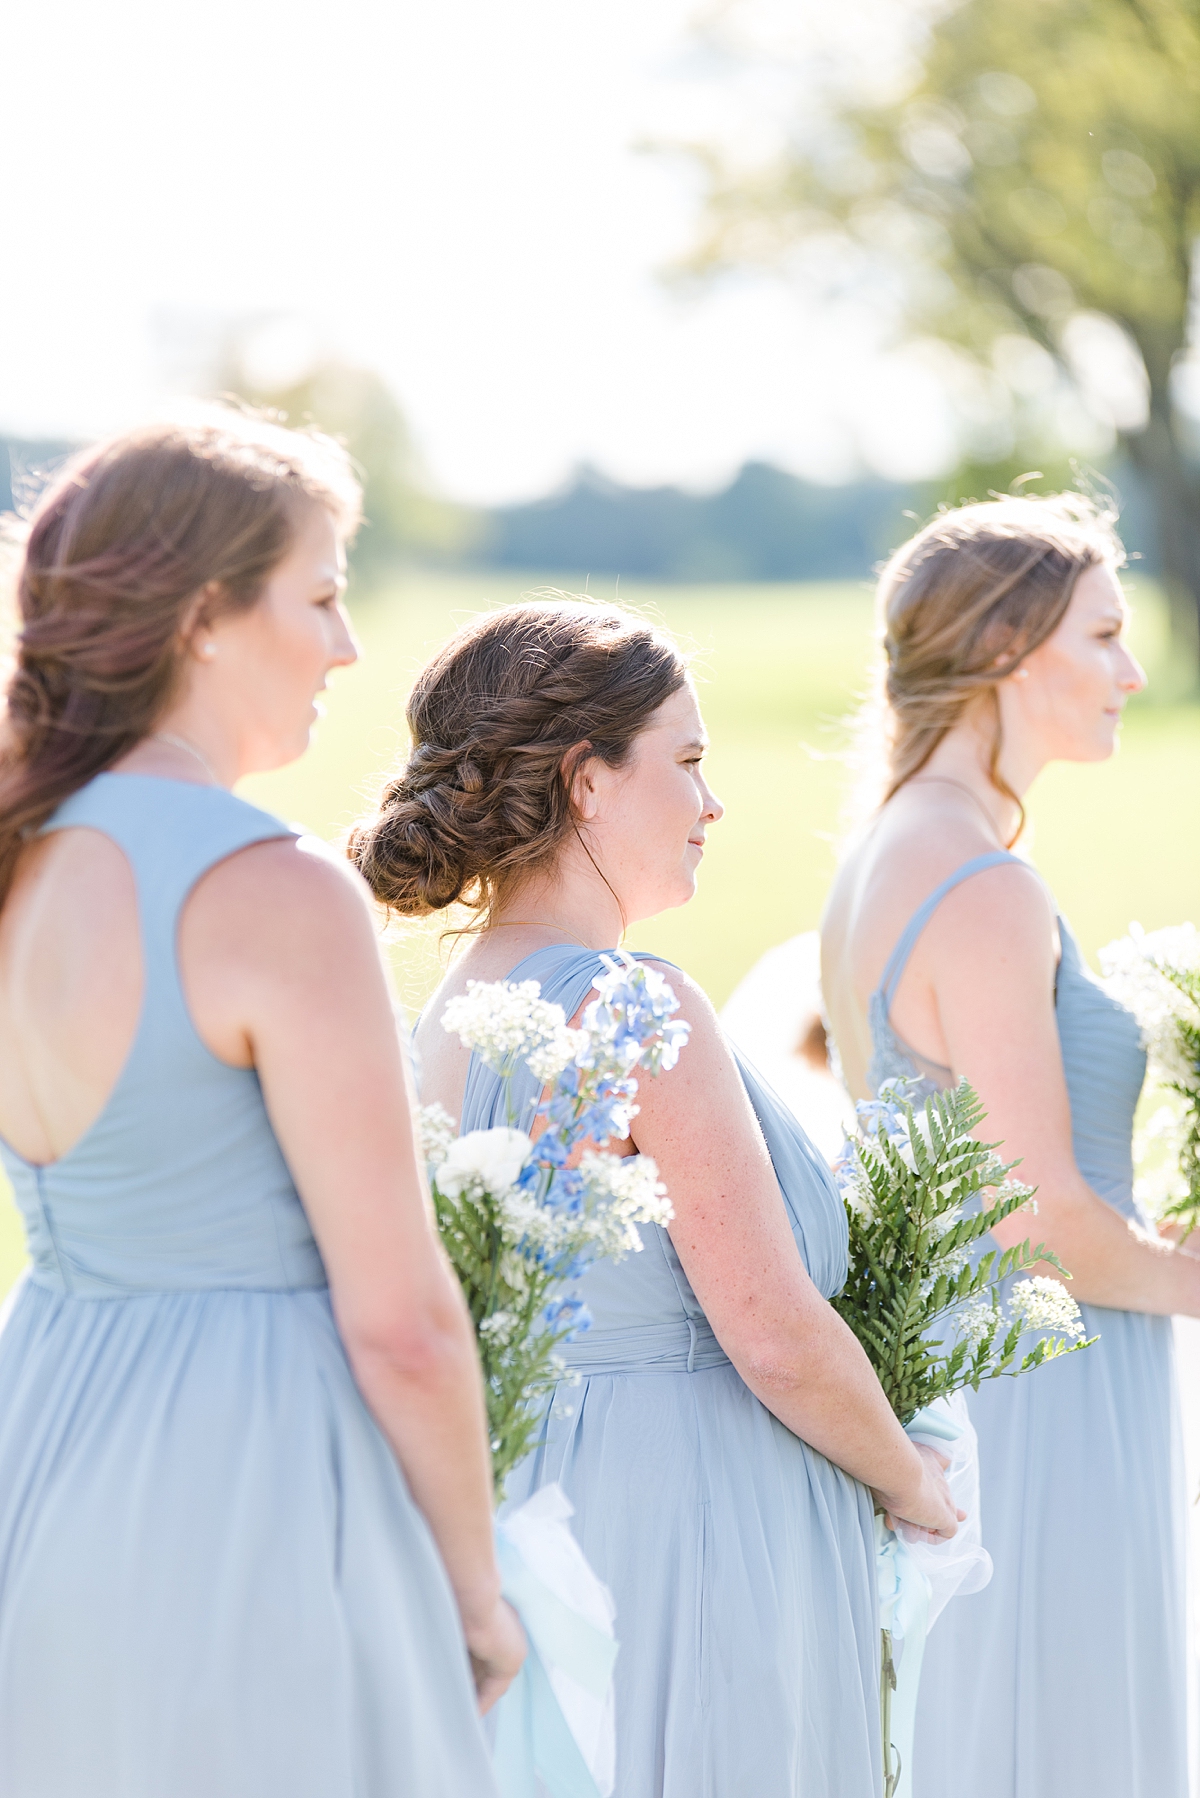 Bridesmaids with Blue Dresses During Rustic Wedding Ceremony at Granary at Valley Pike. Wedding Photography by Charlottesville Wedding Photographer Kailey Brianne Photography. 